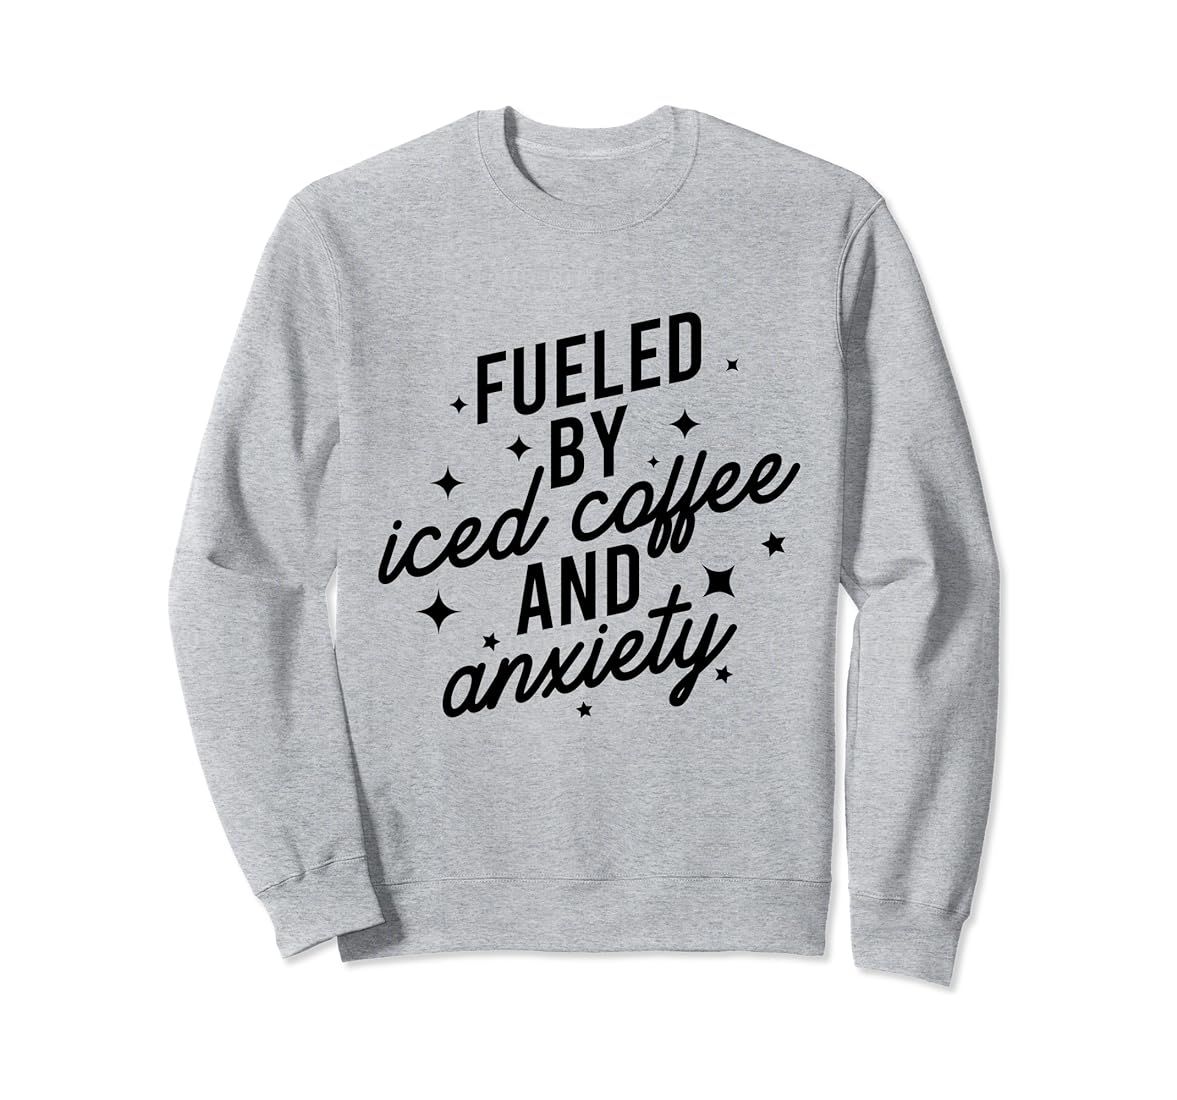 Fueled by Iced Coffee And Anxiety Funny Groovy Coffee Lover Sweatshirt | Amazon (US)